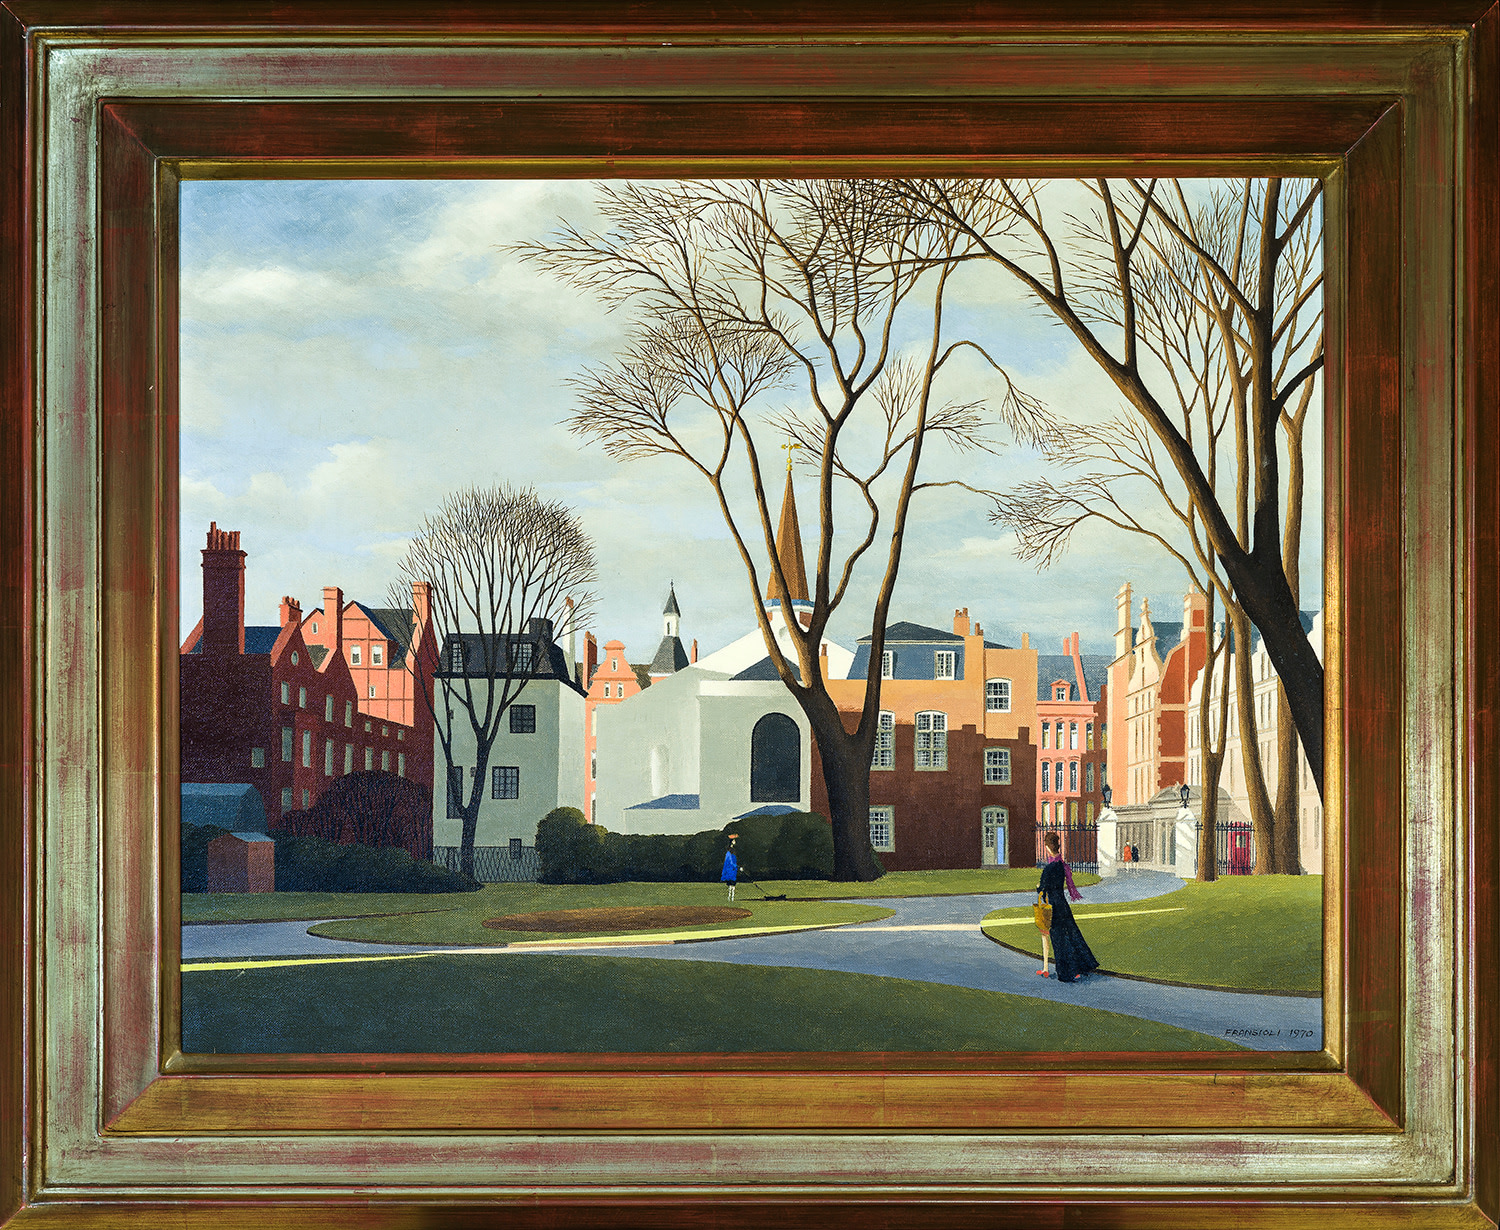 THOMAS FRANSIOLI (1906&ndash;1997).  Mount Street Gardens and the Grosvenor Chapel, London, 1970.  Oil on canvas, 16 x 21 in.